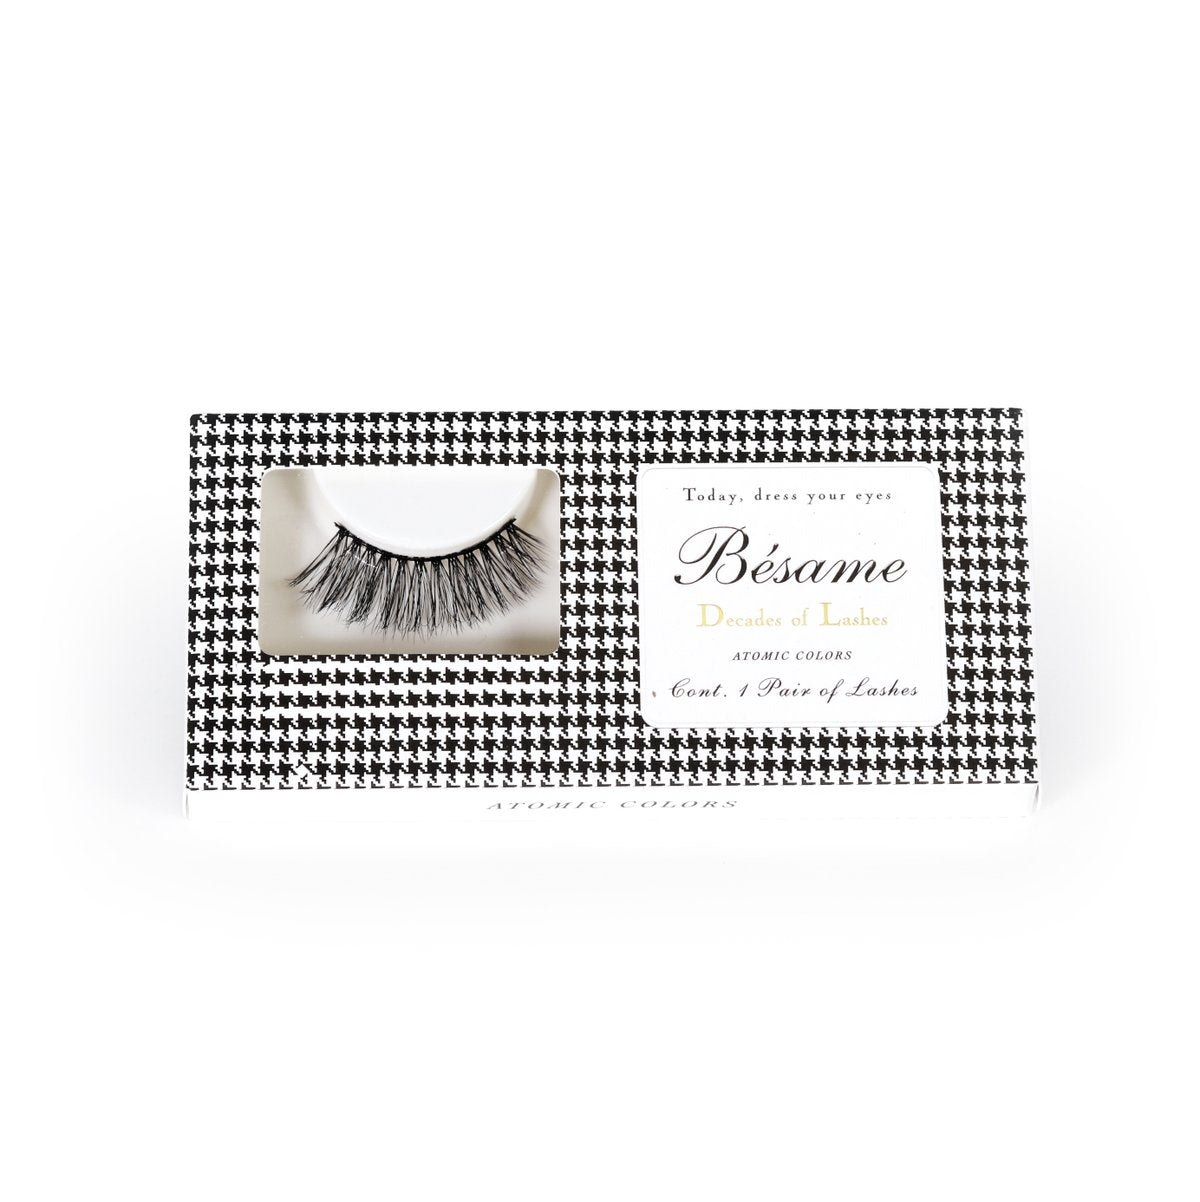 Besame 1950s Lashes "Atomic Colors"